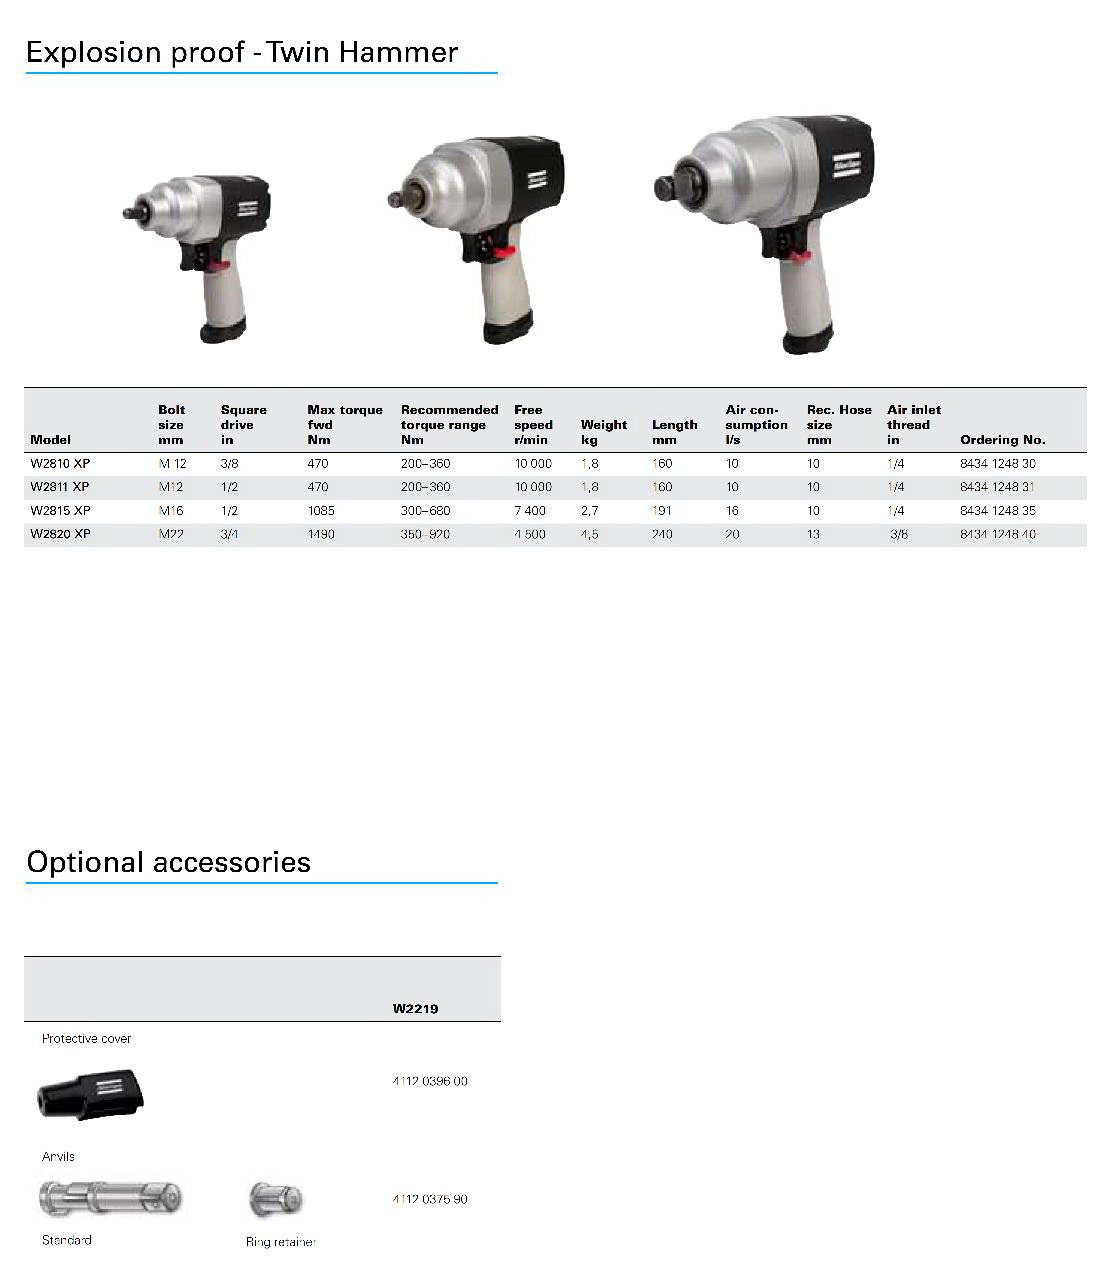 PRO Explosion Proof Impact Wrench, ATEX certified